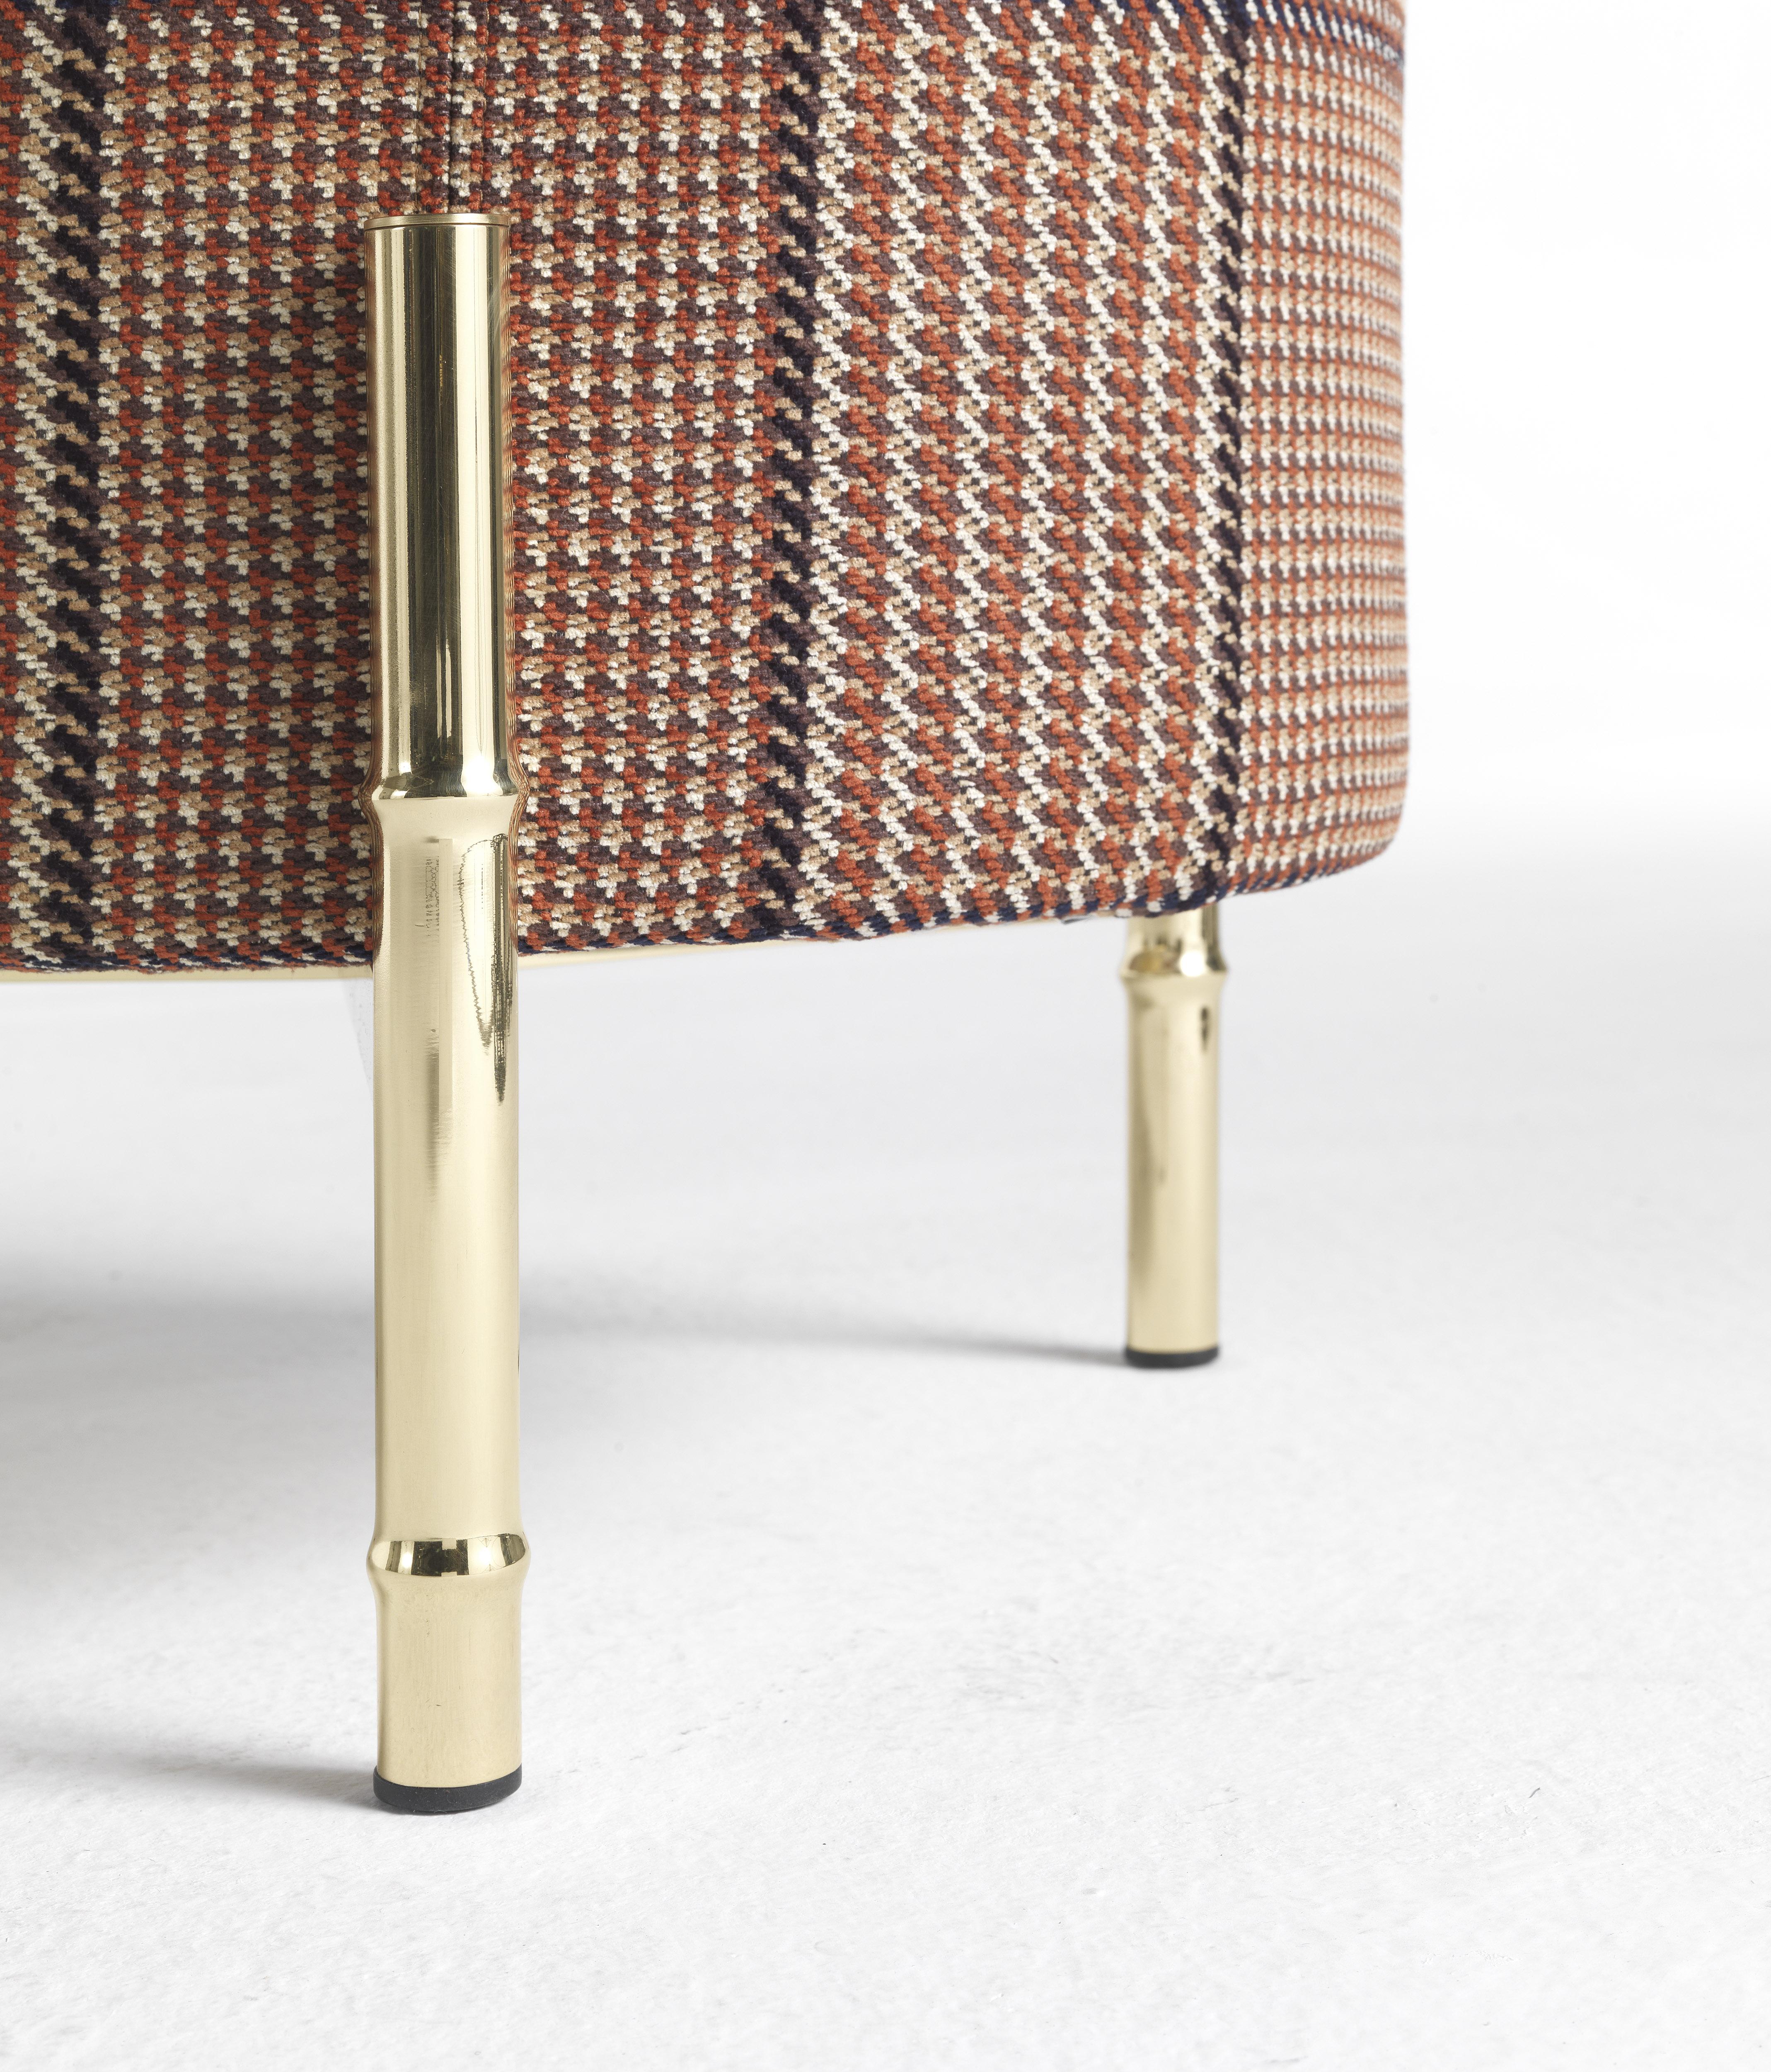 Available in two different shapes and sizes, Samarcanda pouf is a versatile and functional piece of furniture able to fit into any environments. The bamboo canes legs, natural elements re-interpreted in a precious version, combined with the elegant